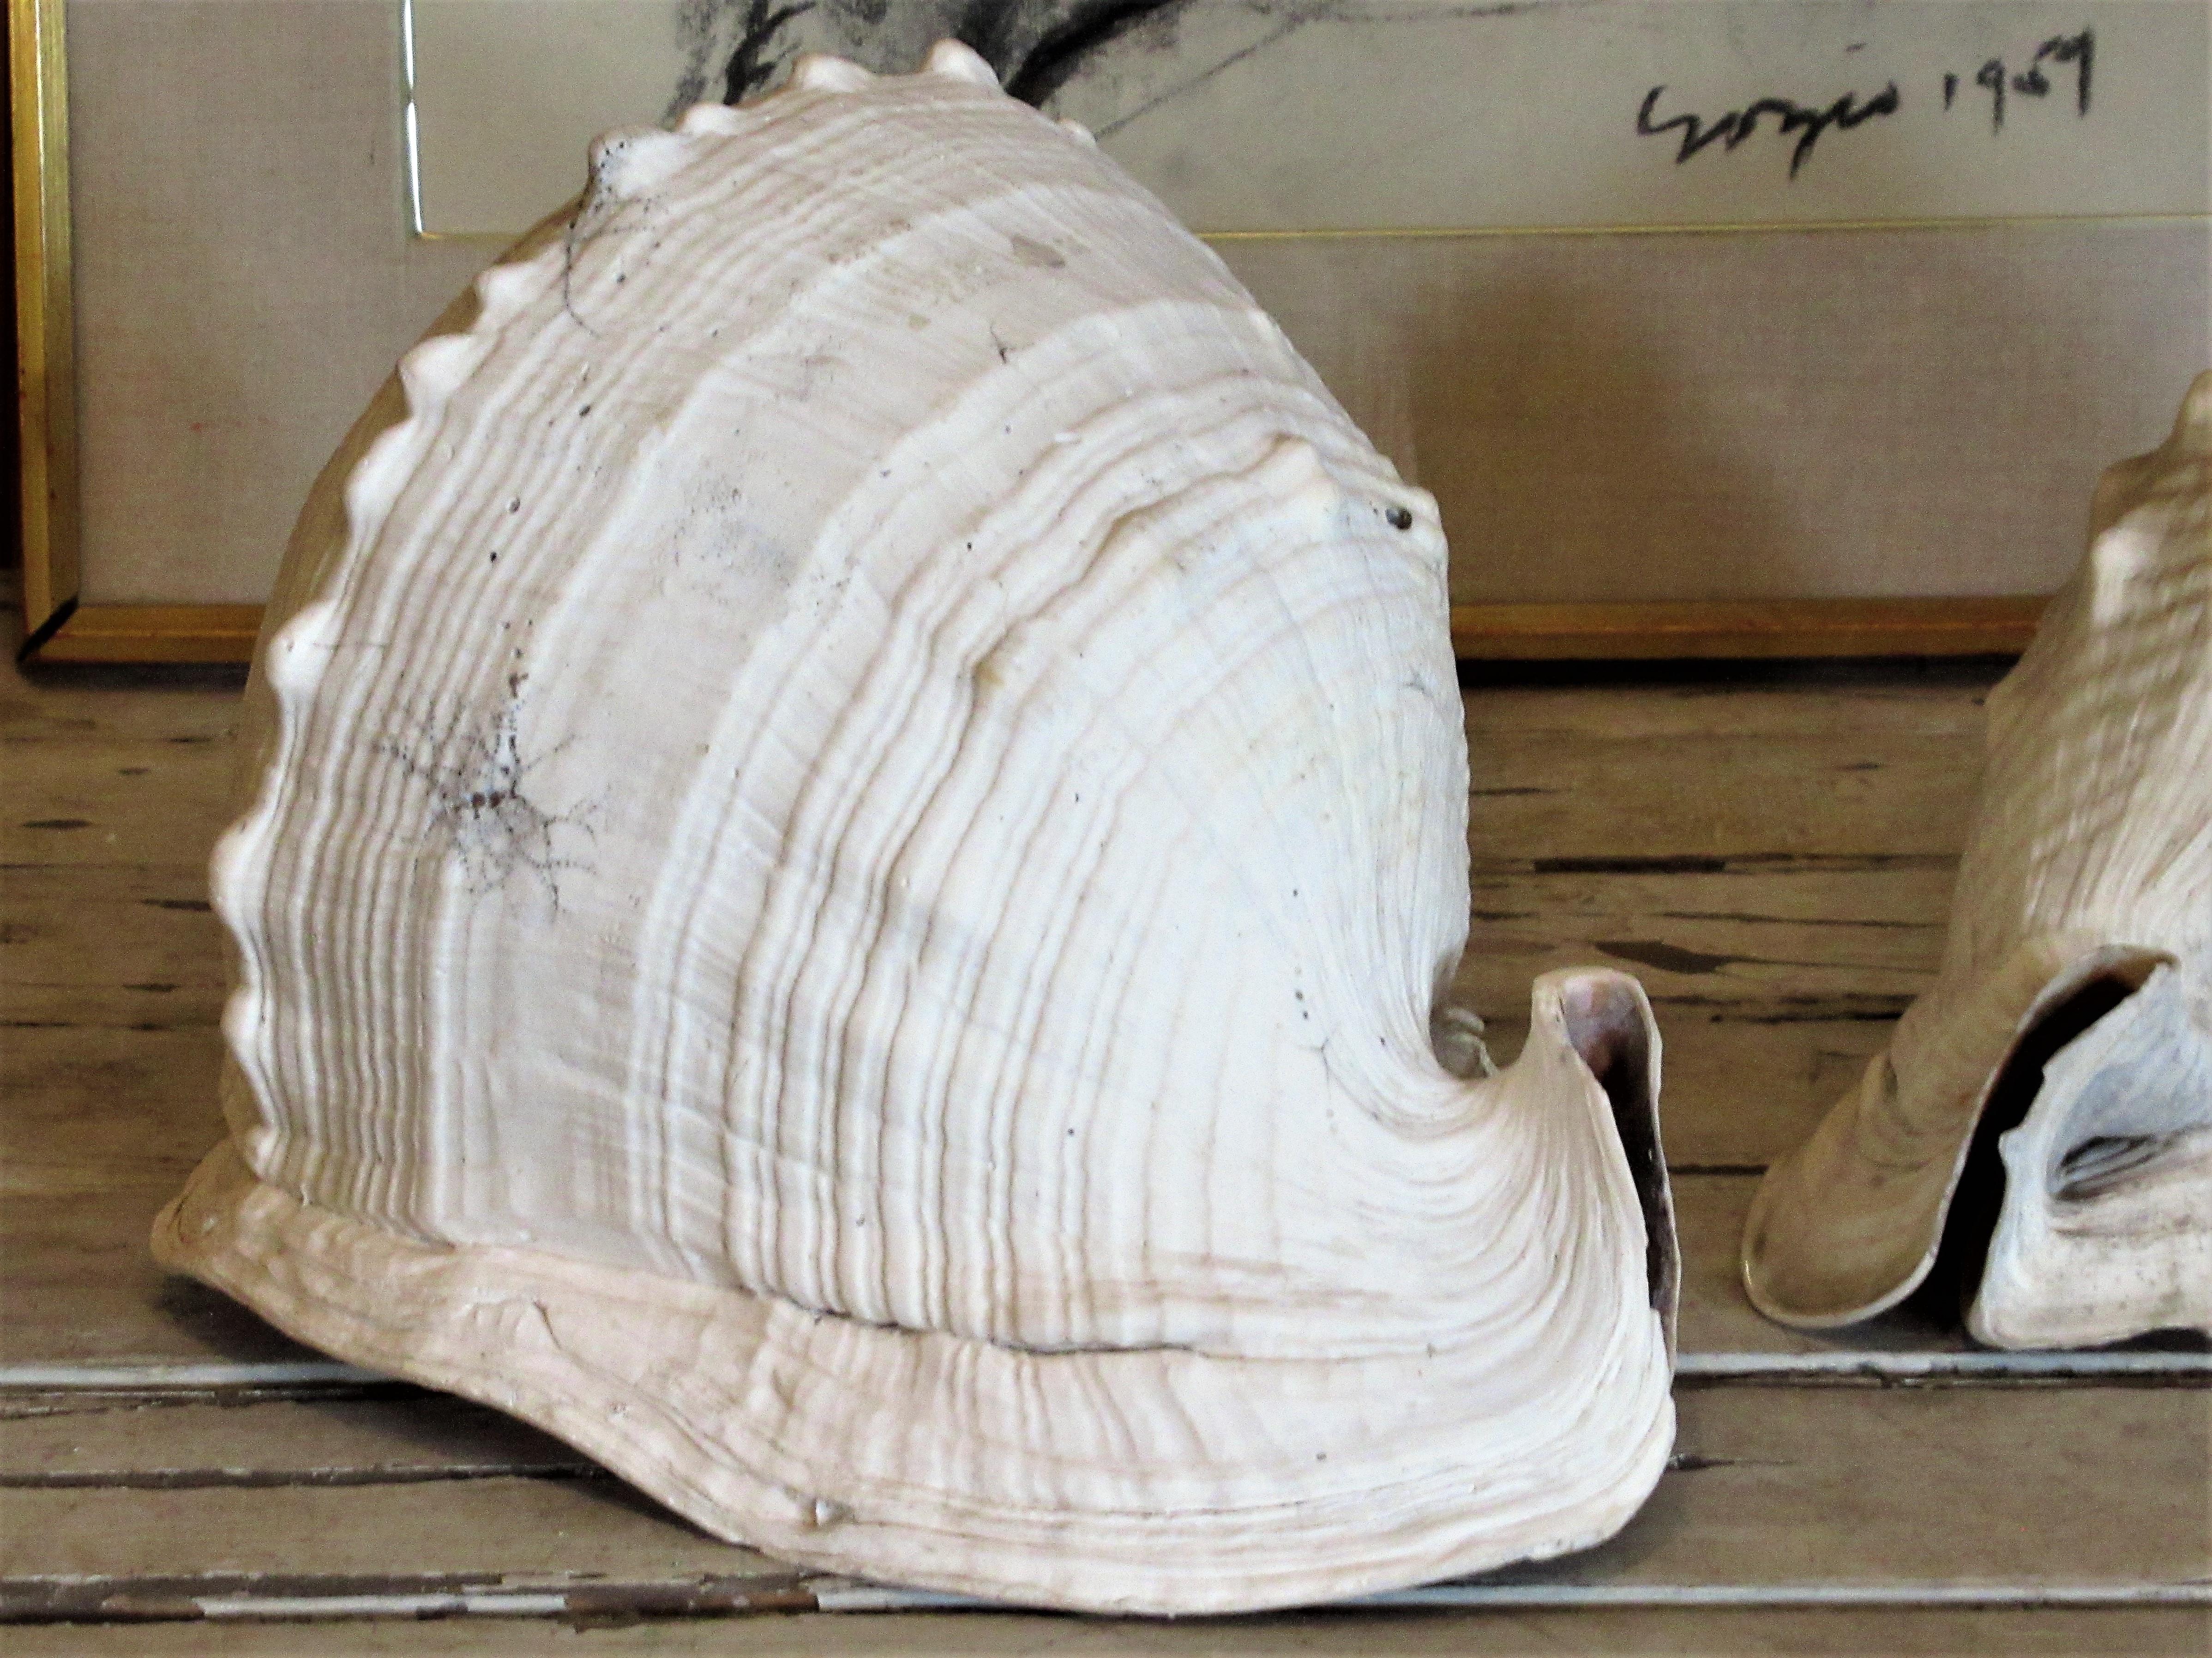  Old Queen Helmet Conch Shell Specimens 7